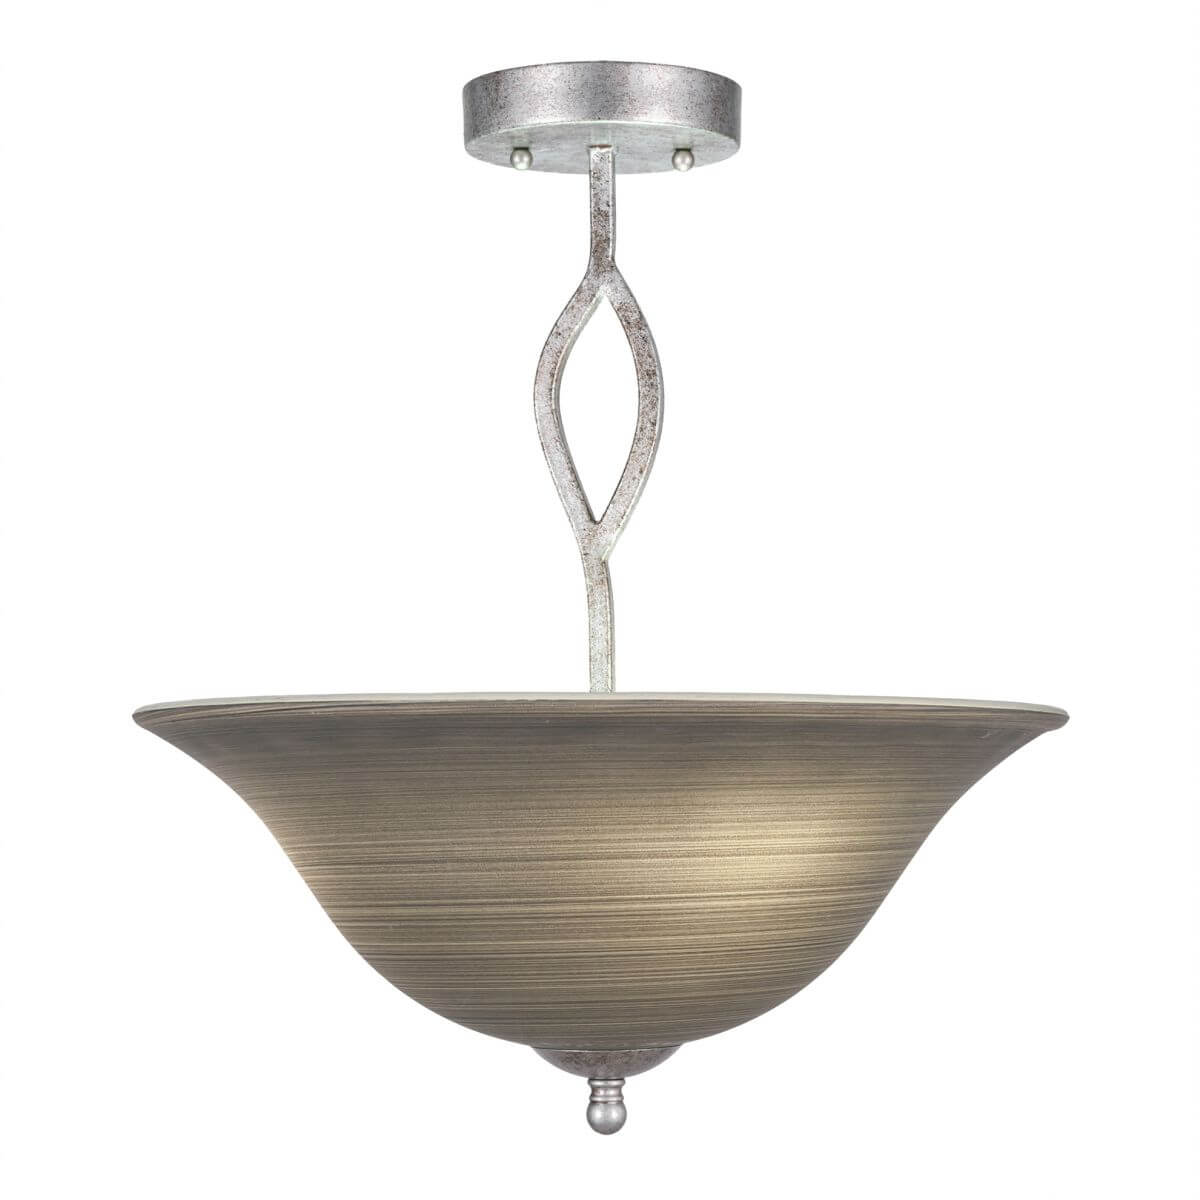 Toltec Lighting 242-AS-602 Revo 3 Light 16 inch Semi-Flush Mount in Aged Silver with 16 inch Gray Linen Glass